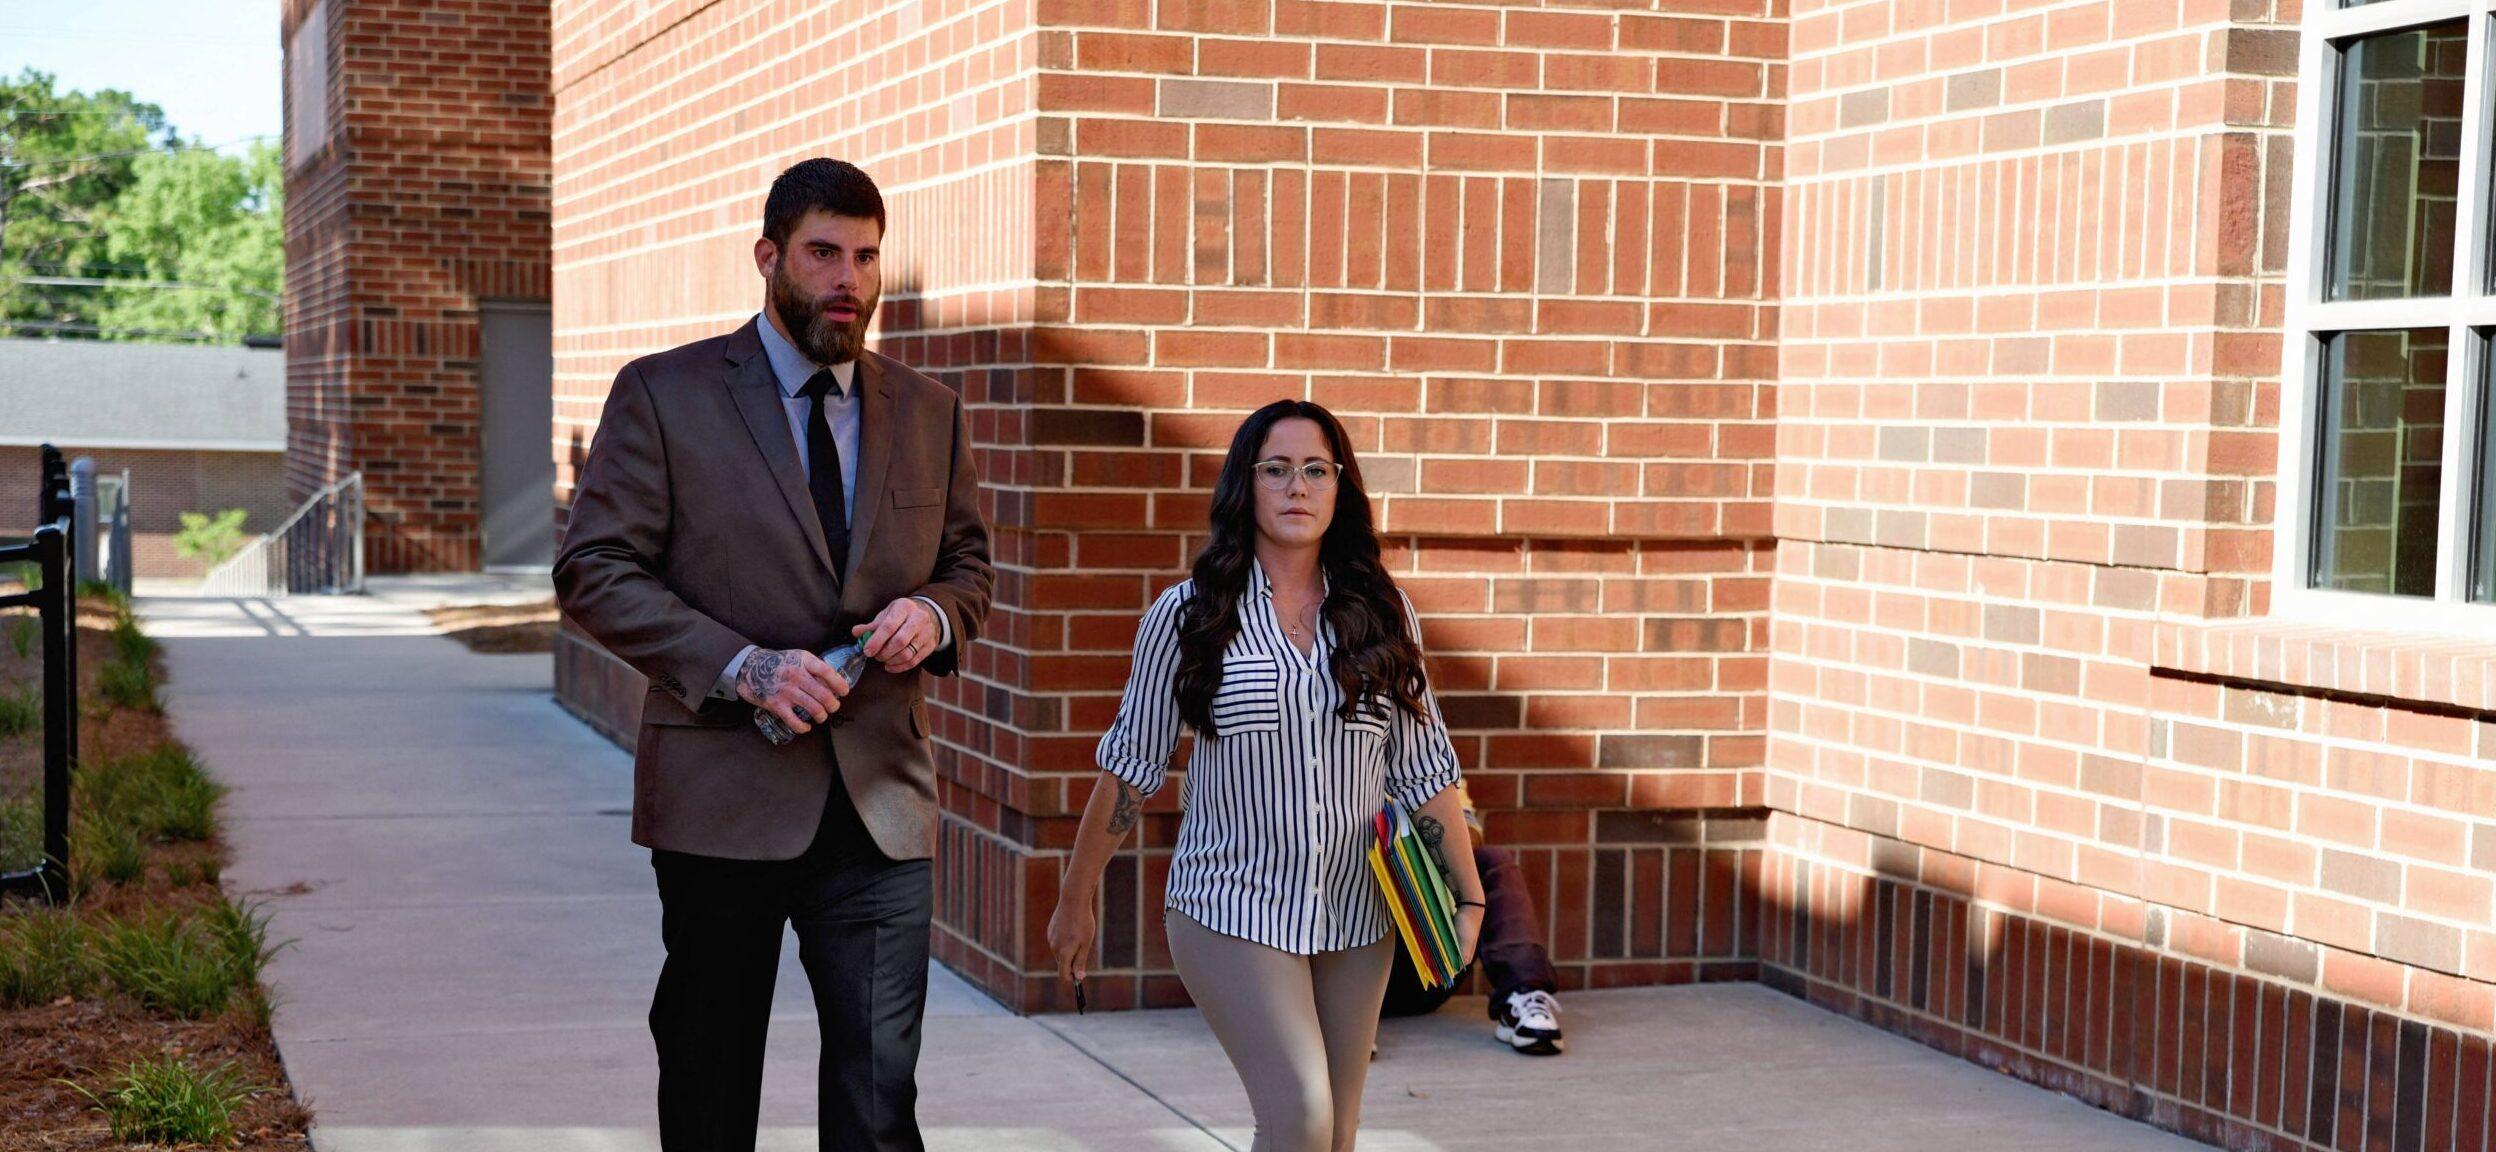 ‘Teen Mom’ Jenelle Evans’ Husband’s Child Abuse Charge Upped To Felony For ‘Strangulation’